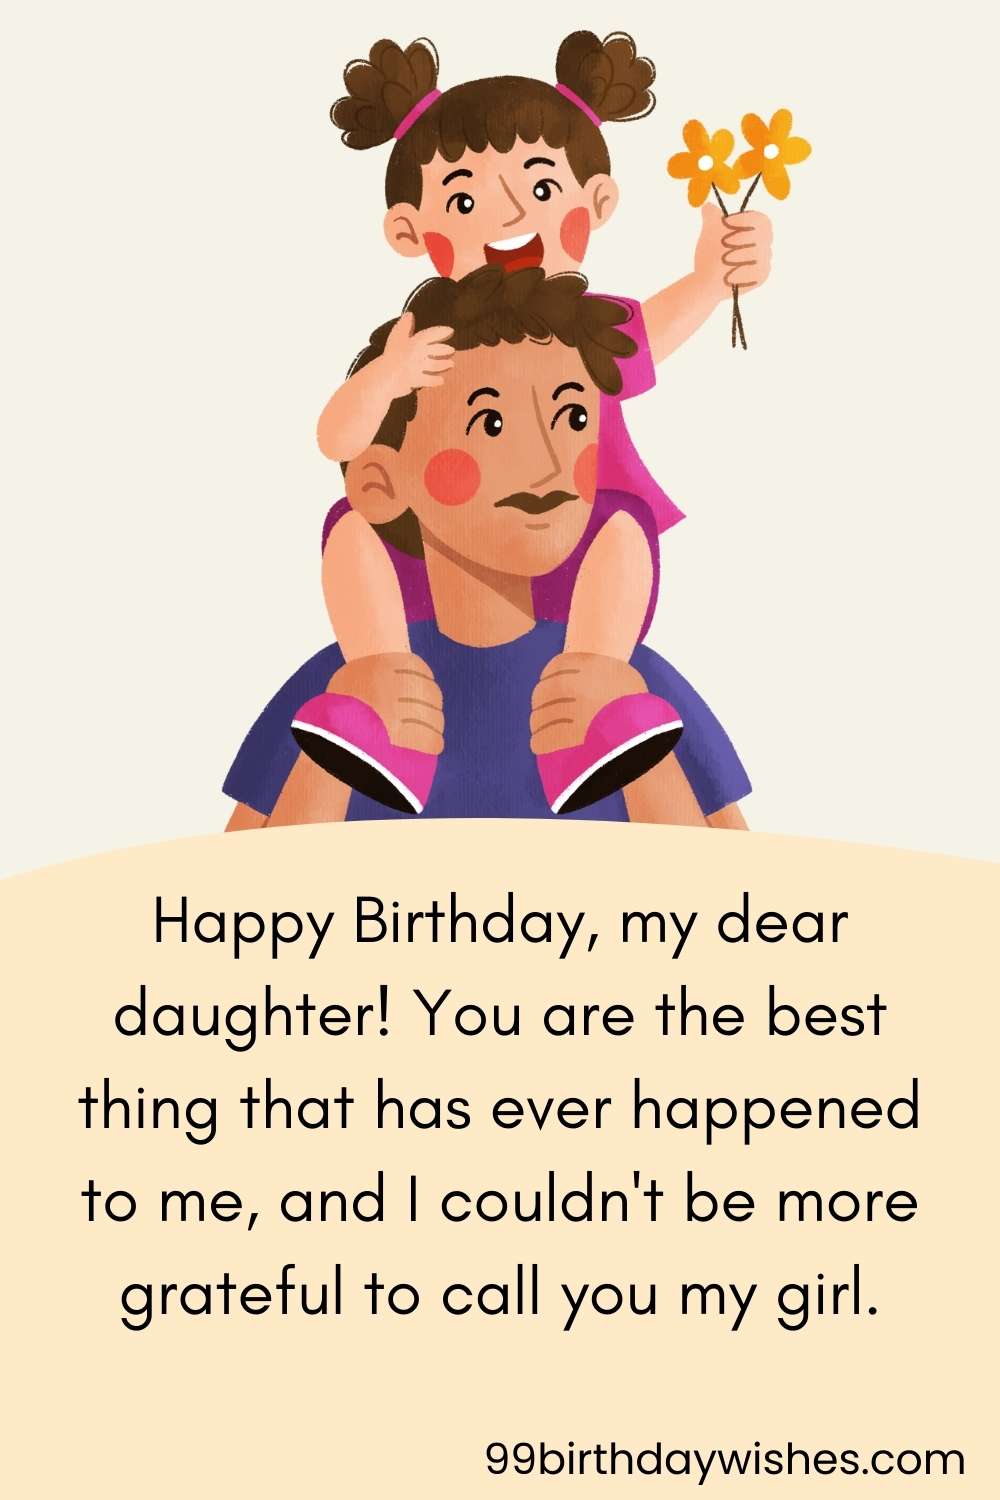 Happy Birthdays Wishes for Daughter from Dad